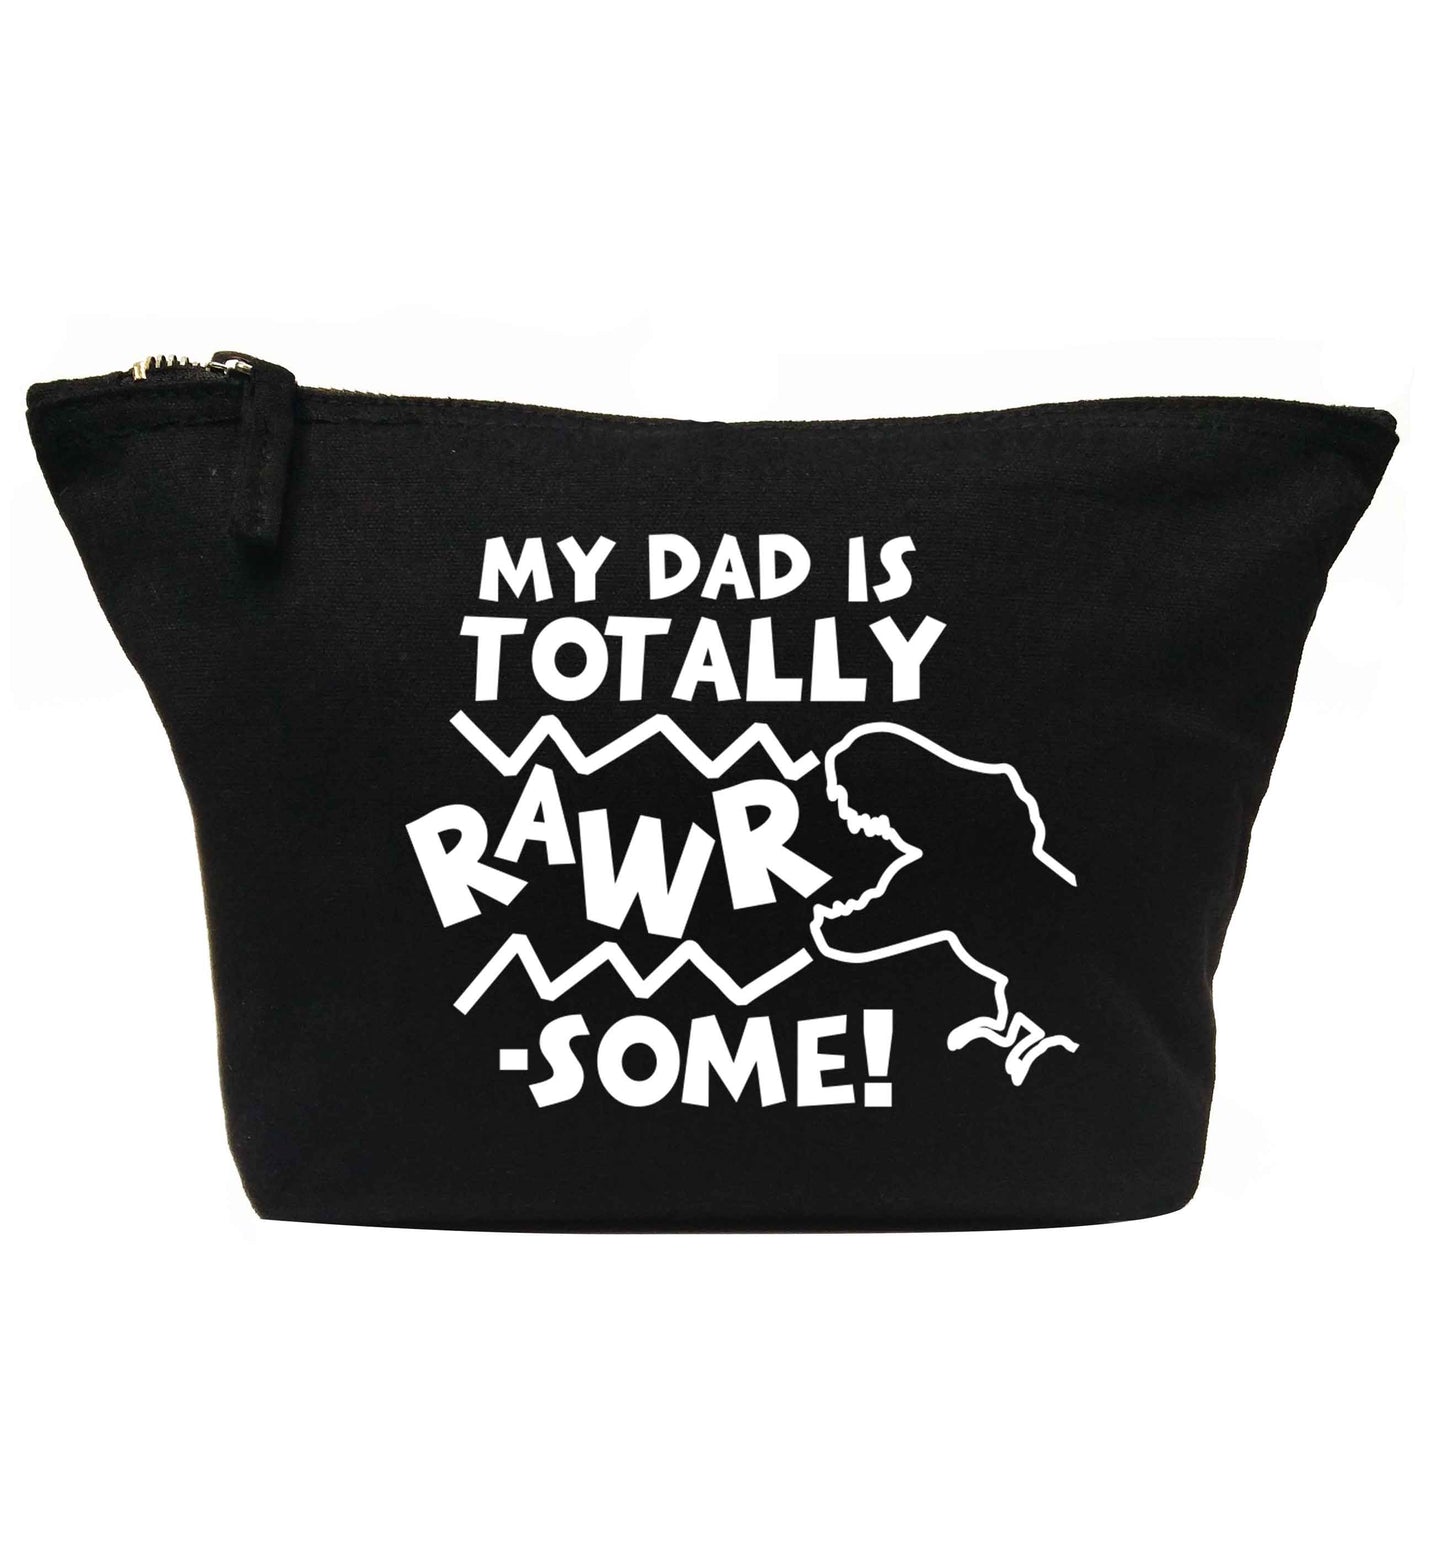 My dad is totally rawrsome | Makeup / wash bag